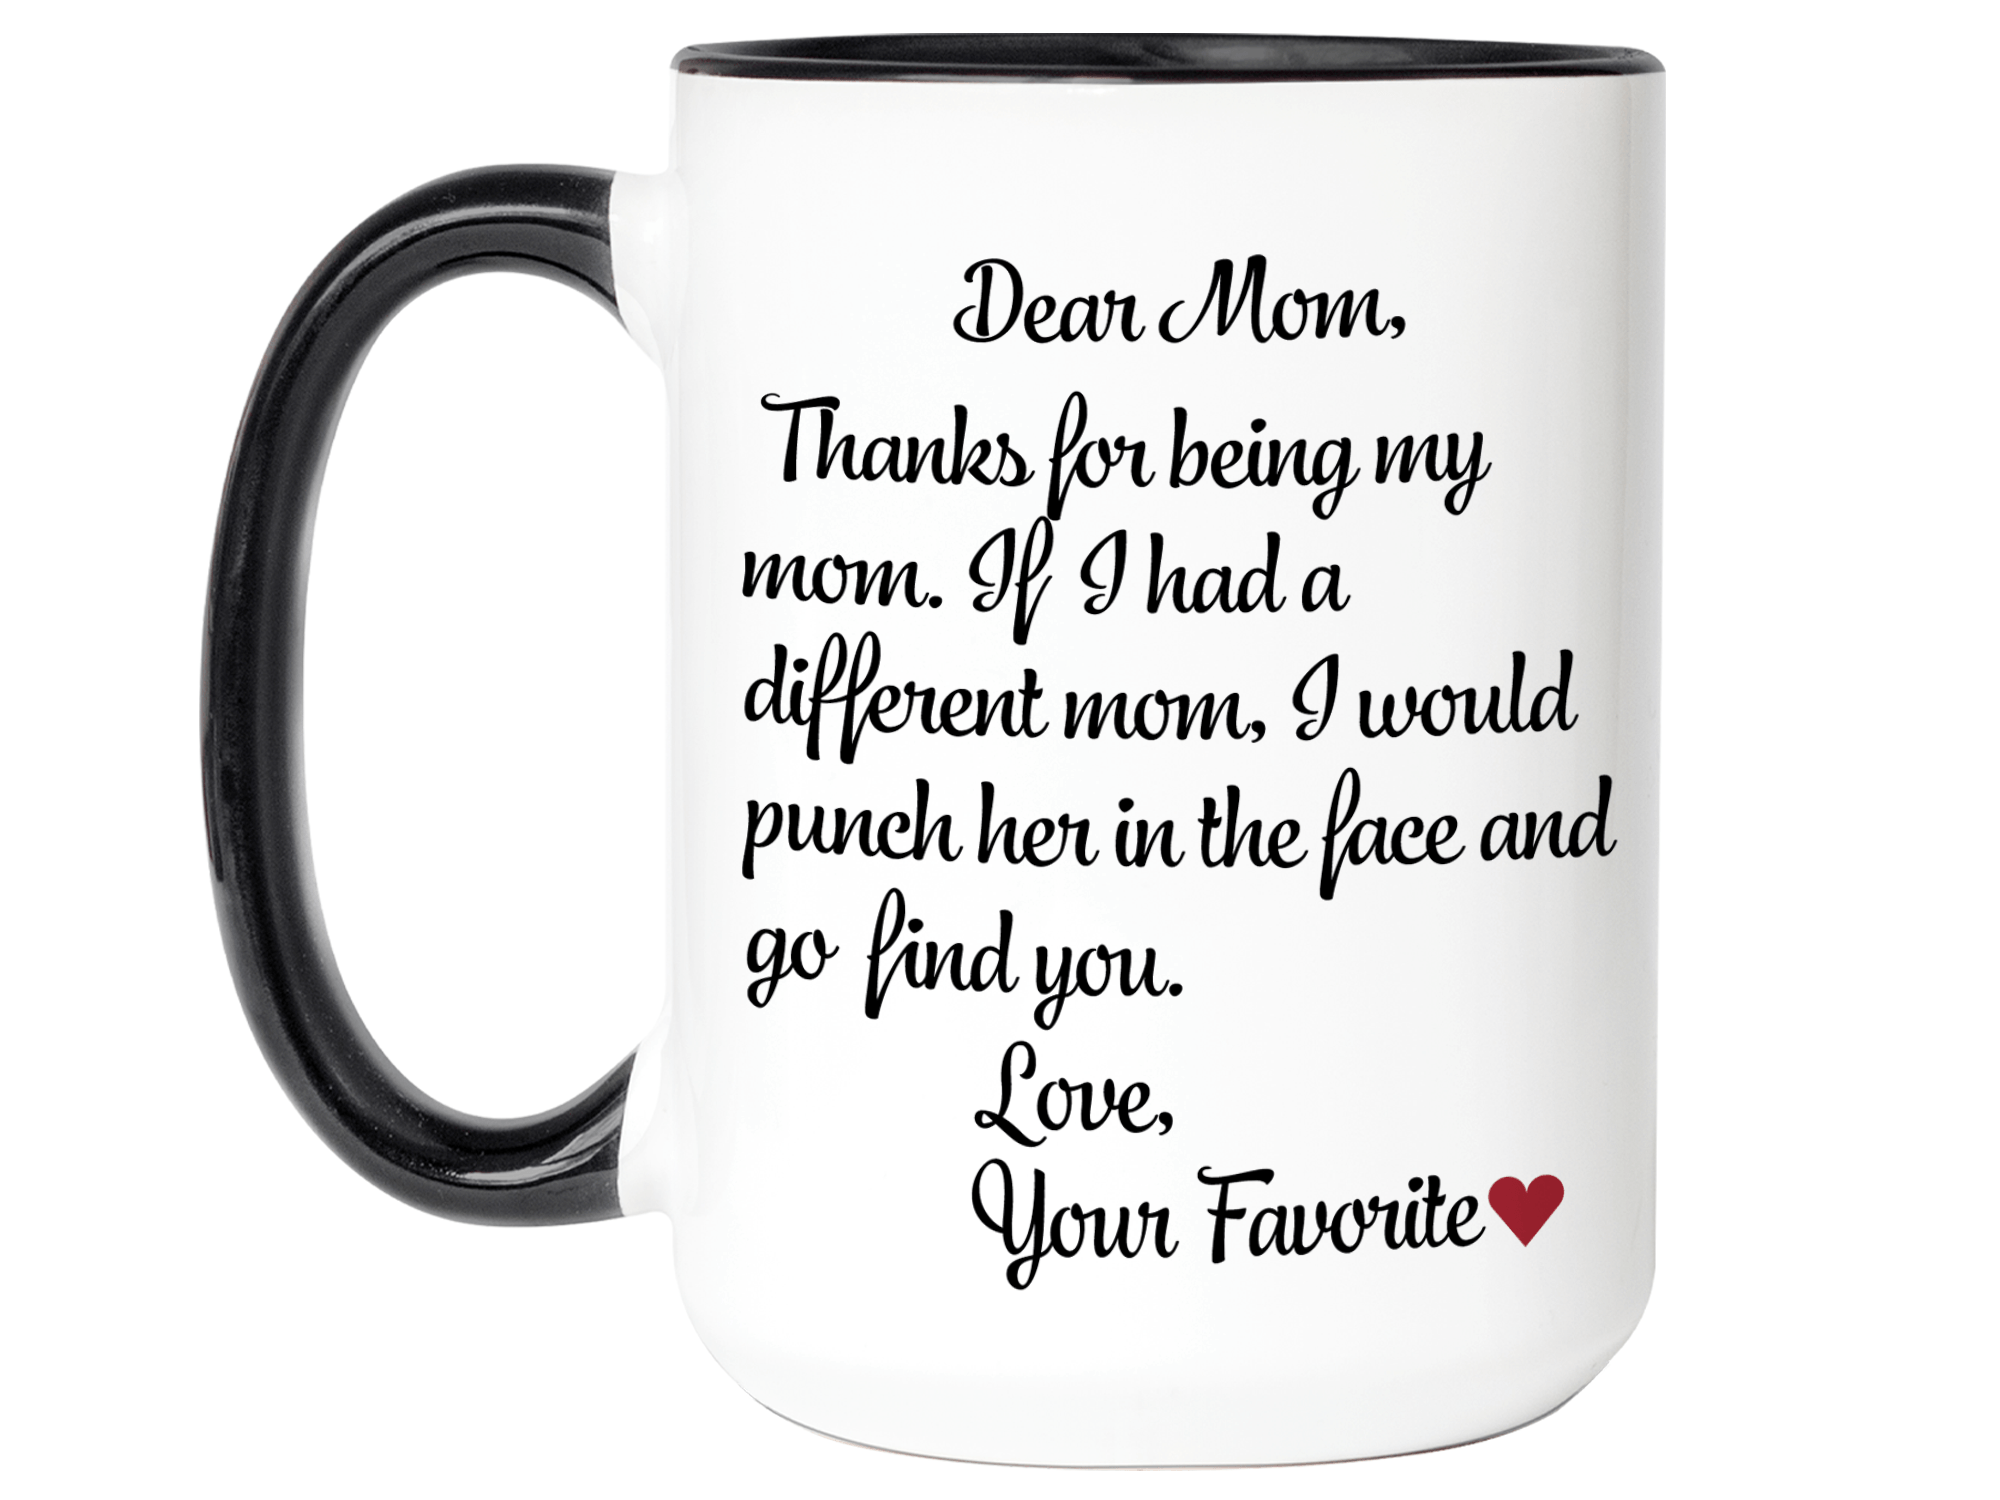 Funny Gifts for Moms, Mother's Day Gifts, Mom Birthday Gift, Mom Gag Cup,  Dear Mom Thanks for Being My Mom, Birthday Gifts for Moms 